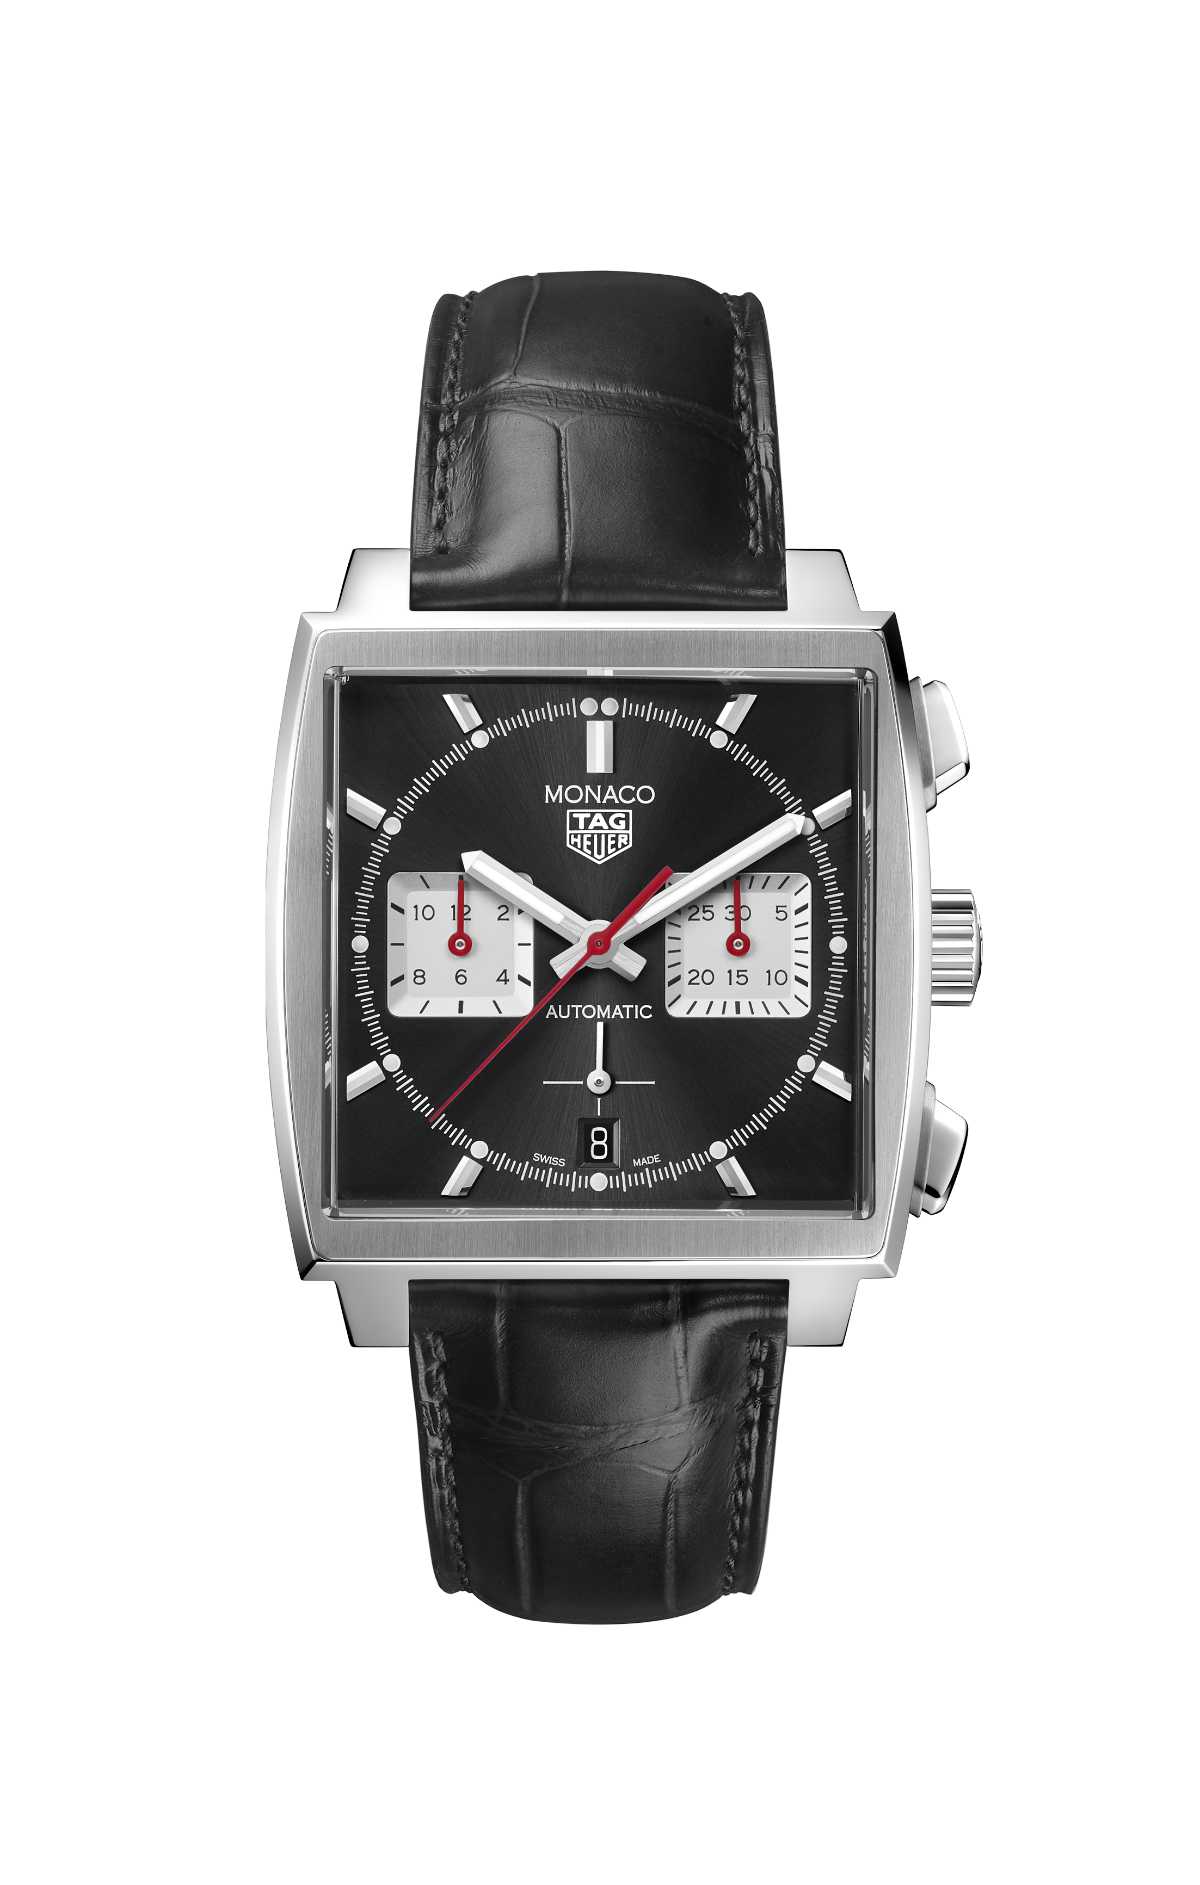 Tag Heuer introduces new Monaco timepieces with in-house Calibre Heuer 02 and stylishly redesigned bracelets